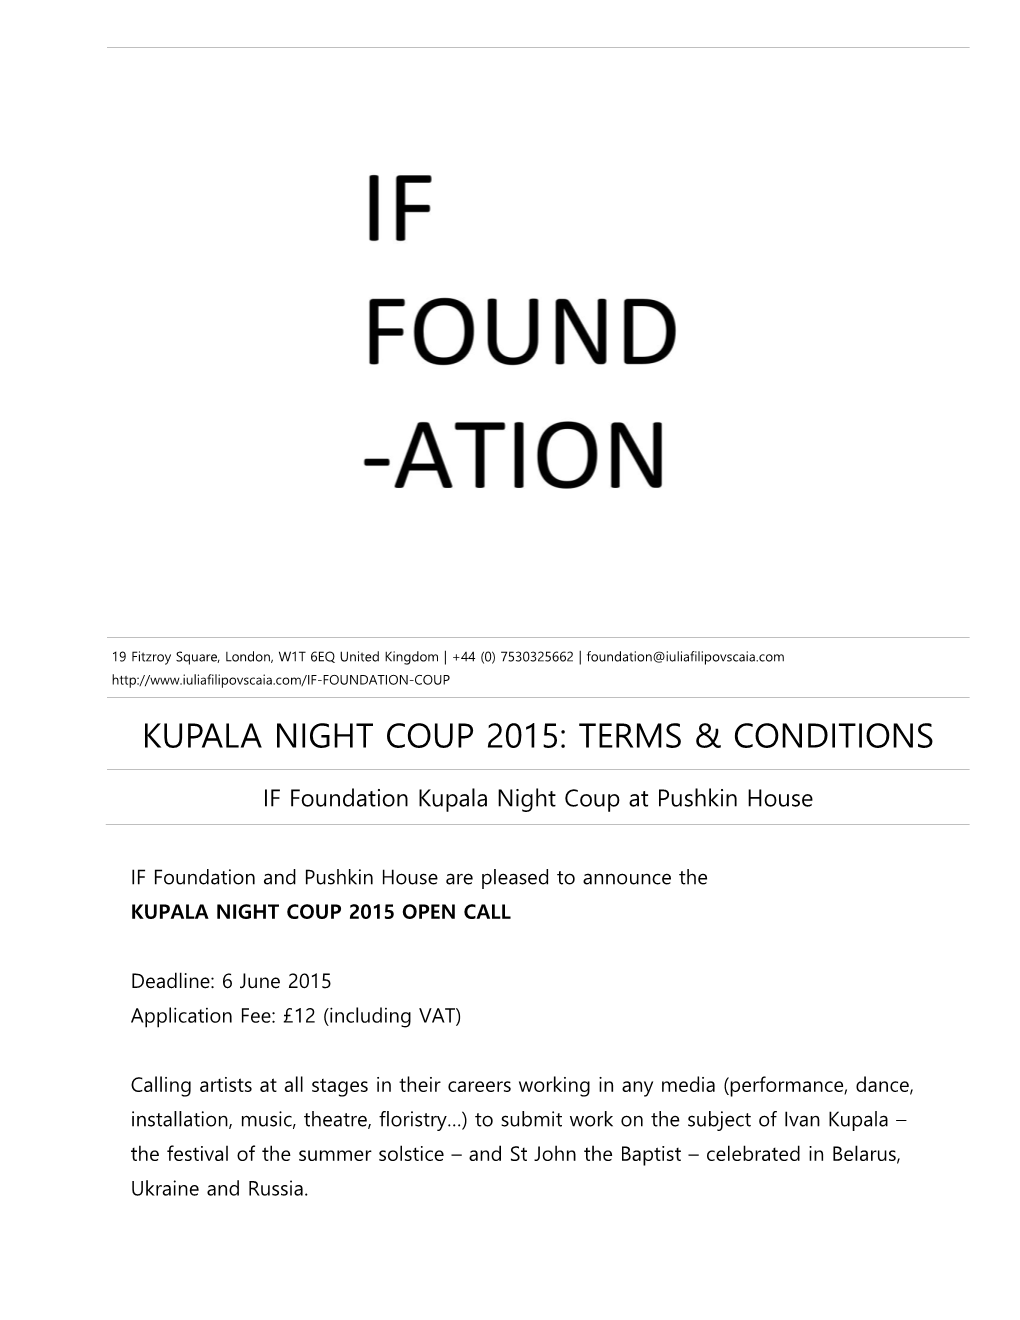 Kupala Night Coup 2015: Terms & Conditions